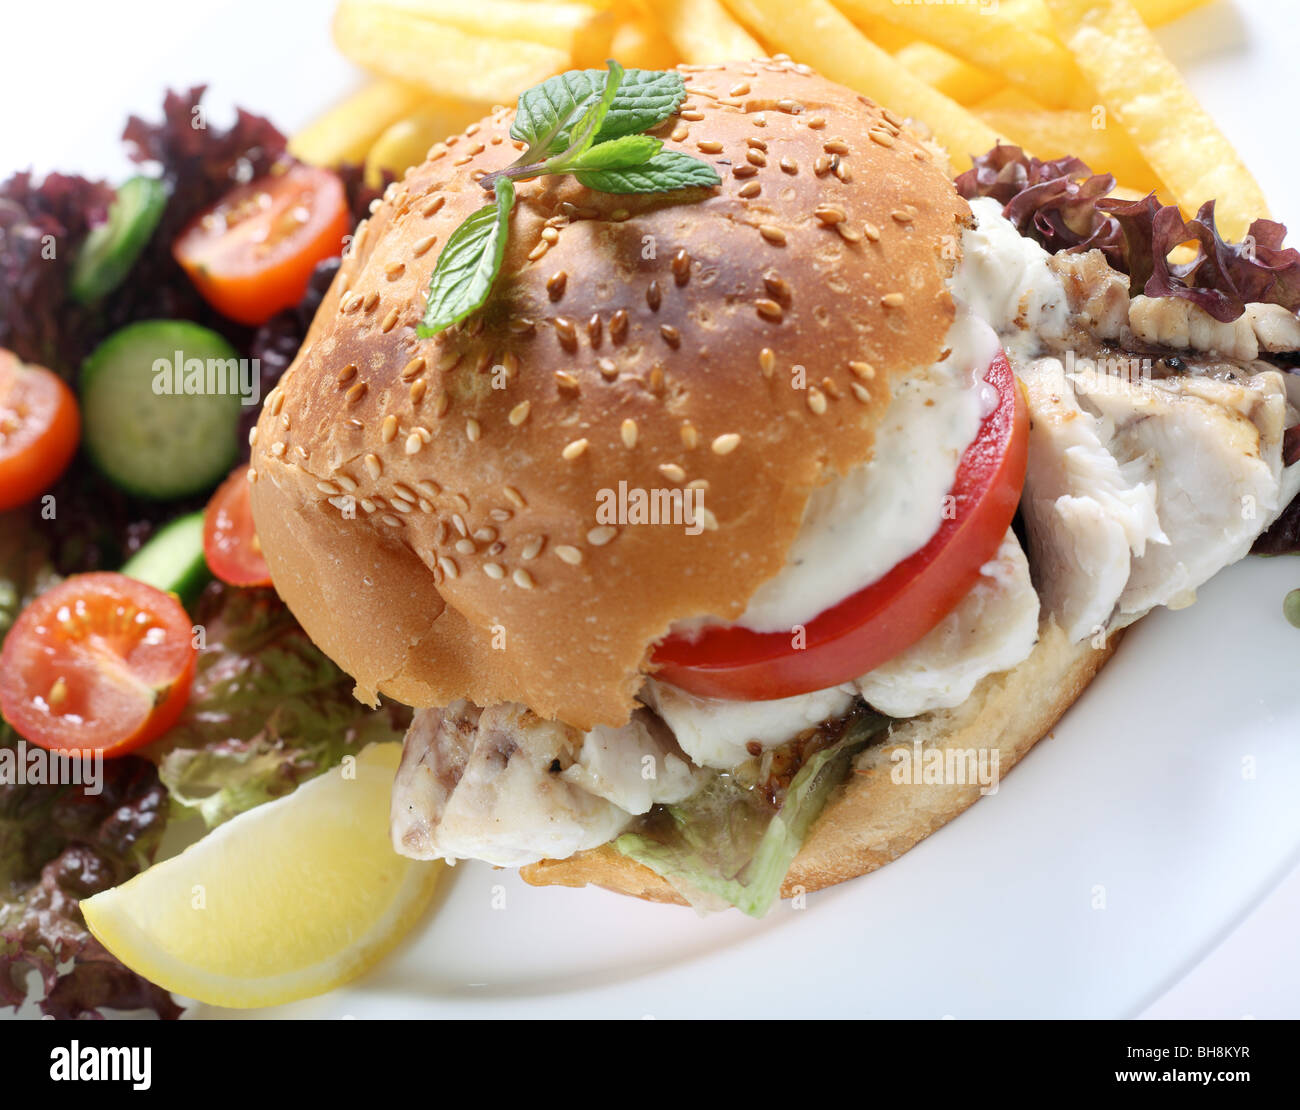 A fried fish fillet in a burger bun, with lettuce and tomato and topped with a creamy sauce. Stock Photo